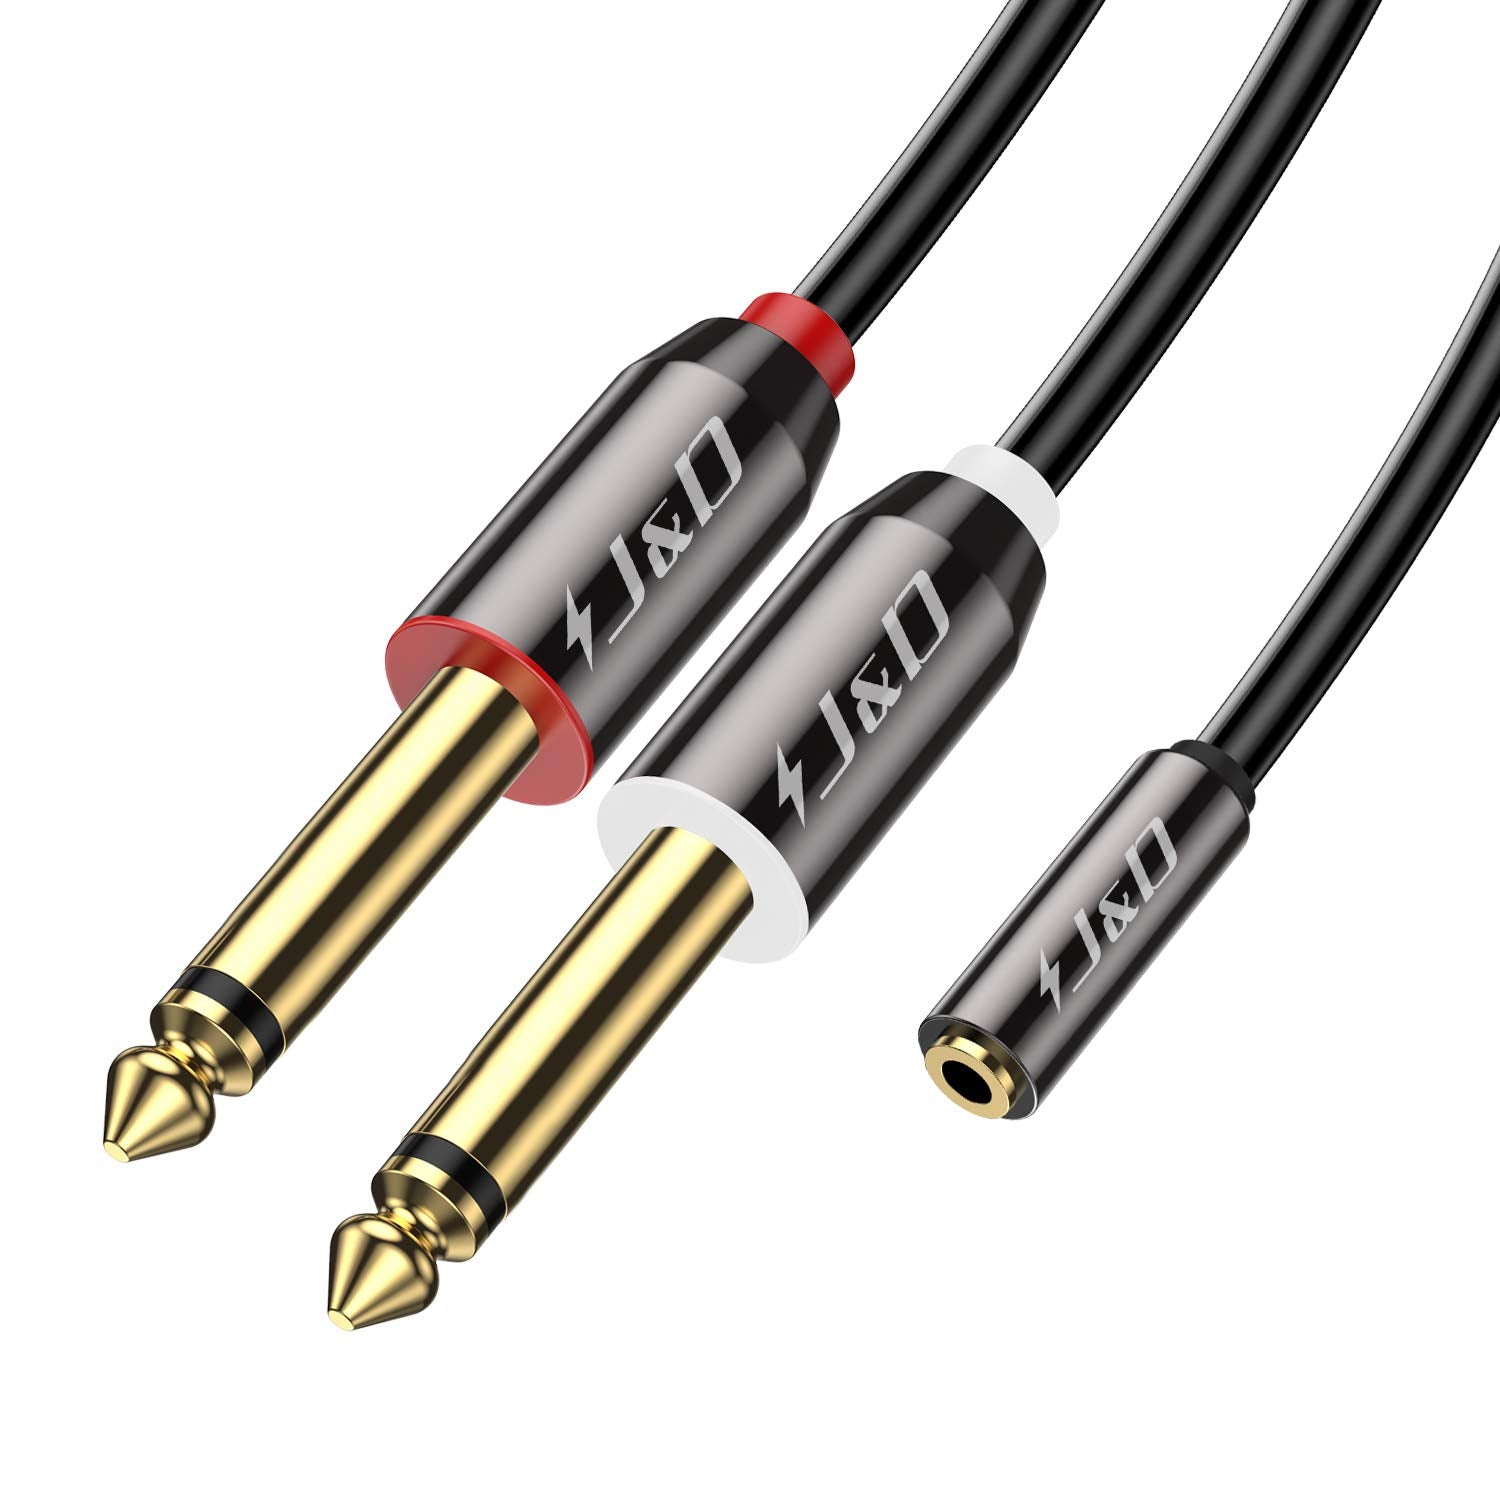 3.5mm audio jack to 6.35mm